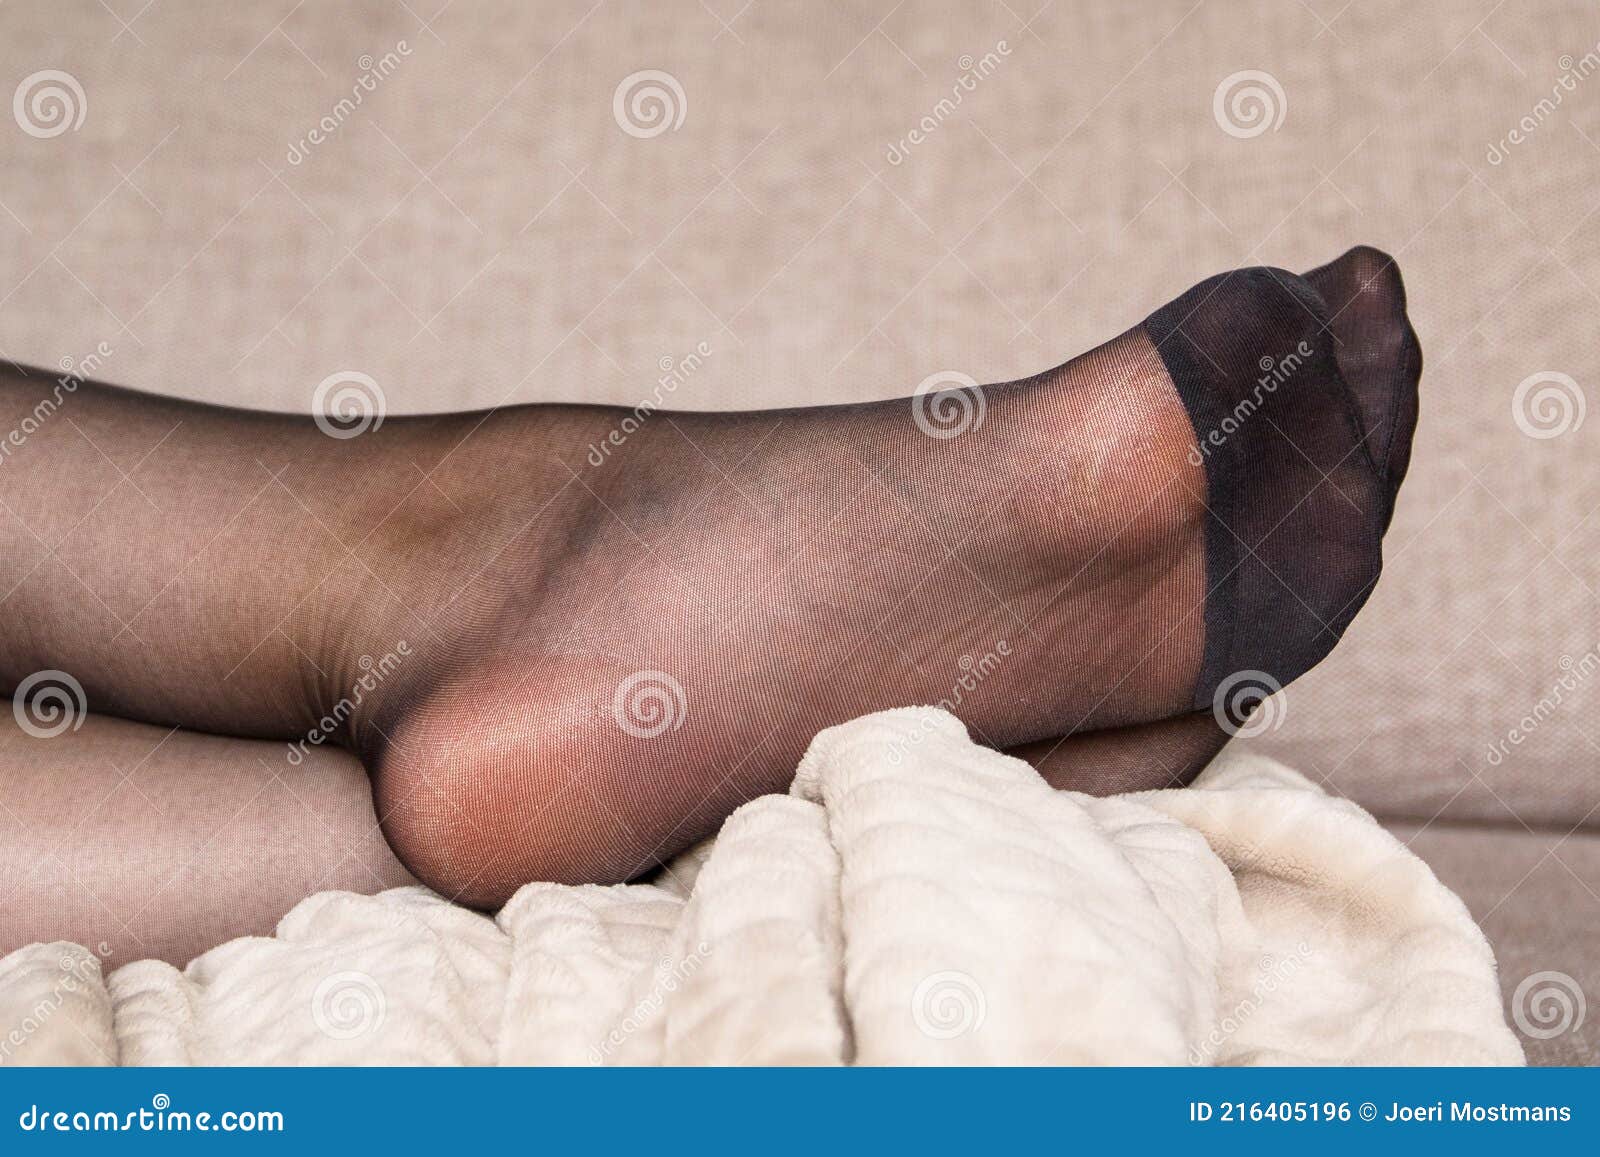 A Close Up Portrait of the Feet of a Woman in Black Nylon